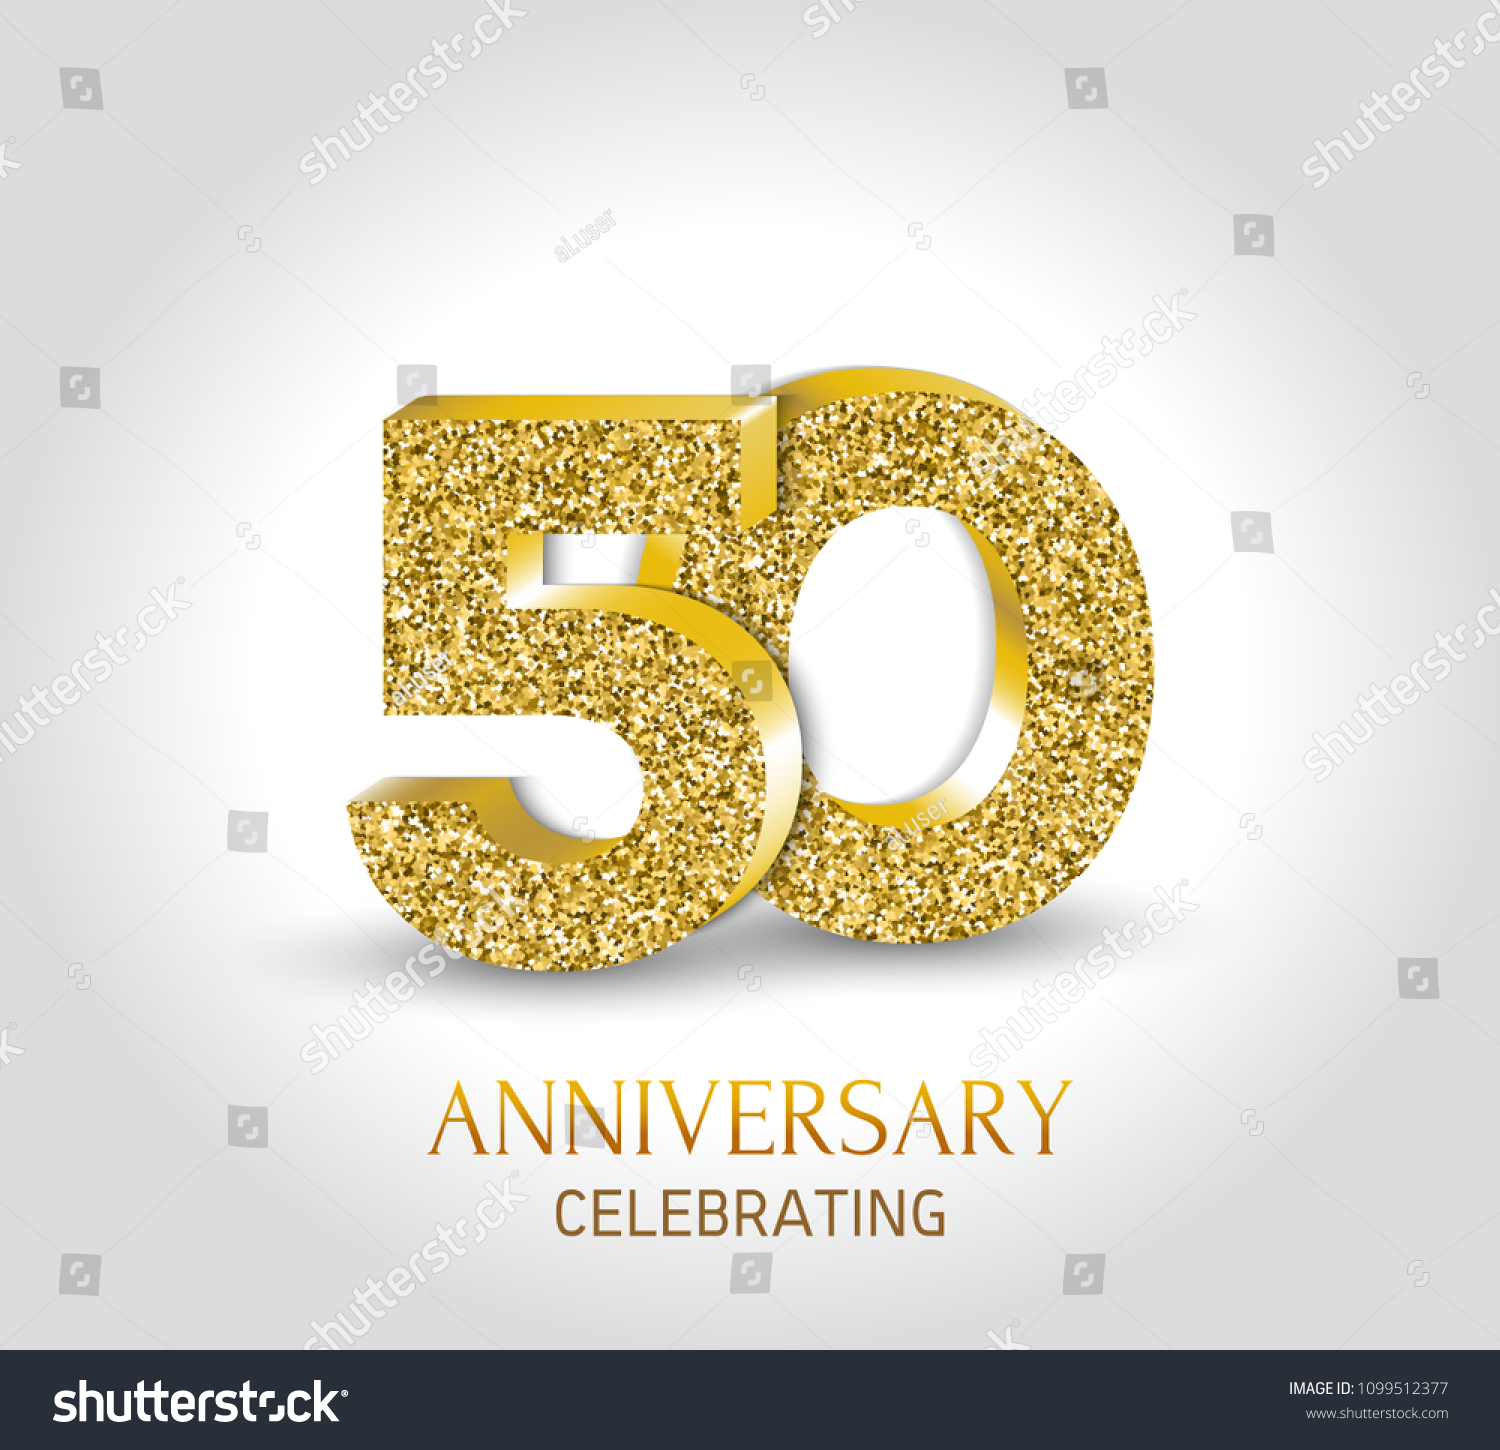 SVG of 45th anniversary card template with 3d gold colored elements. svg